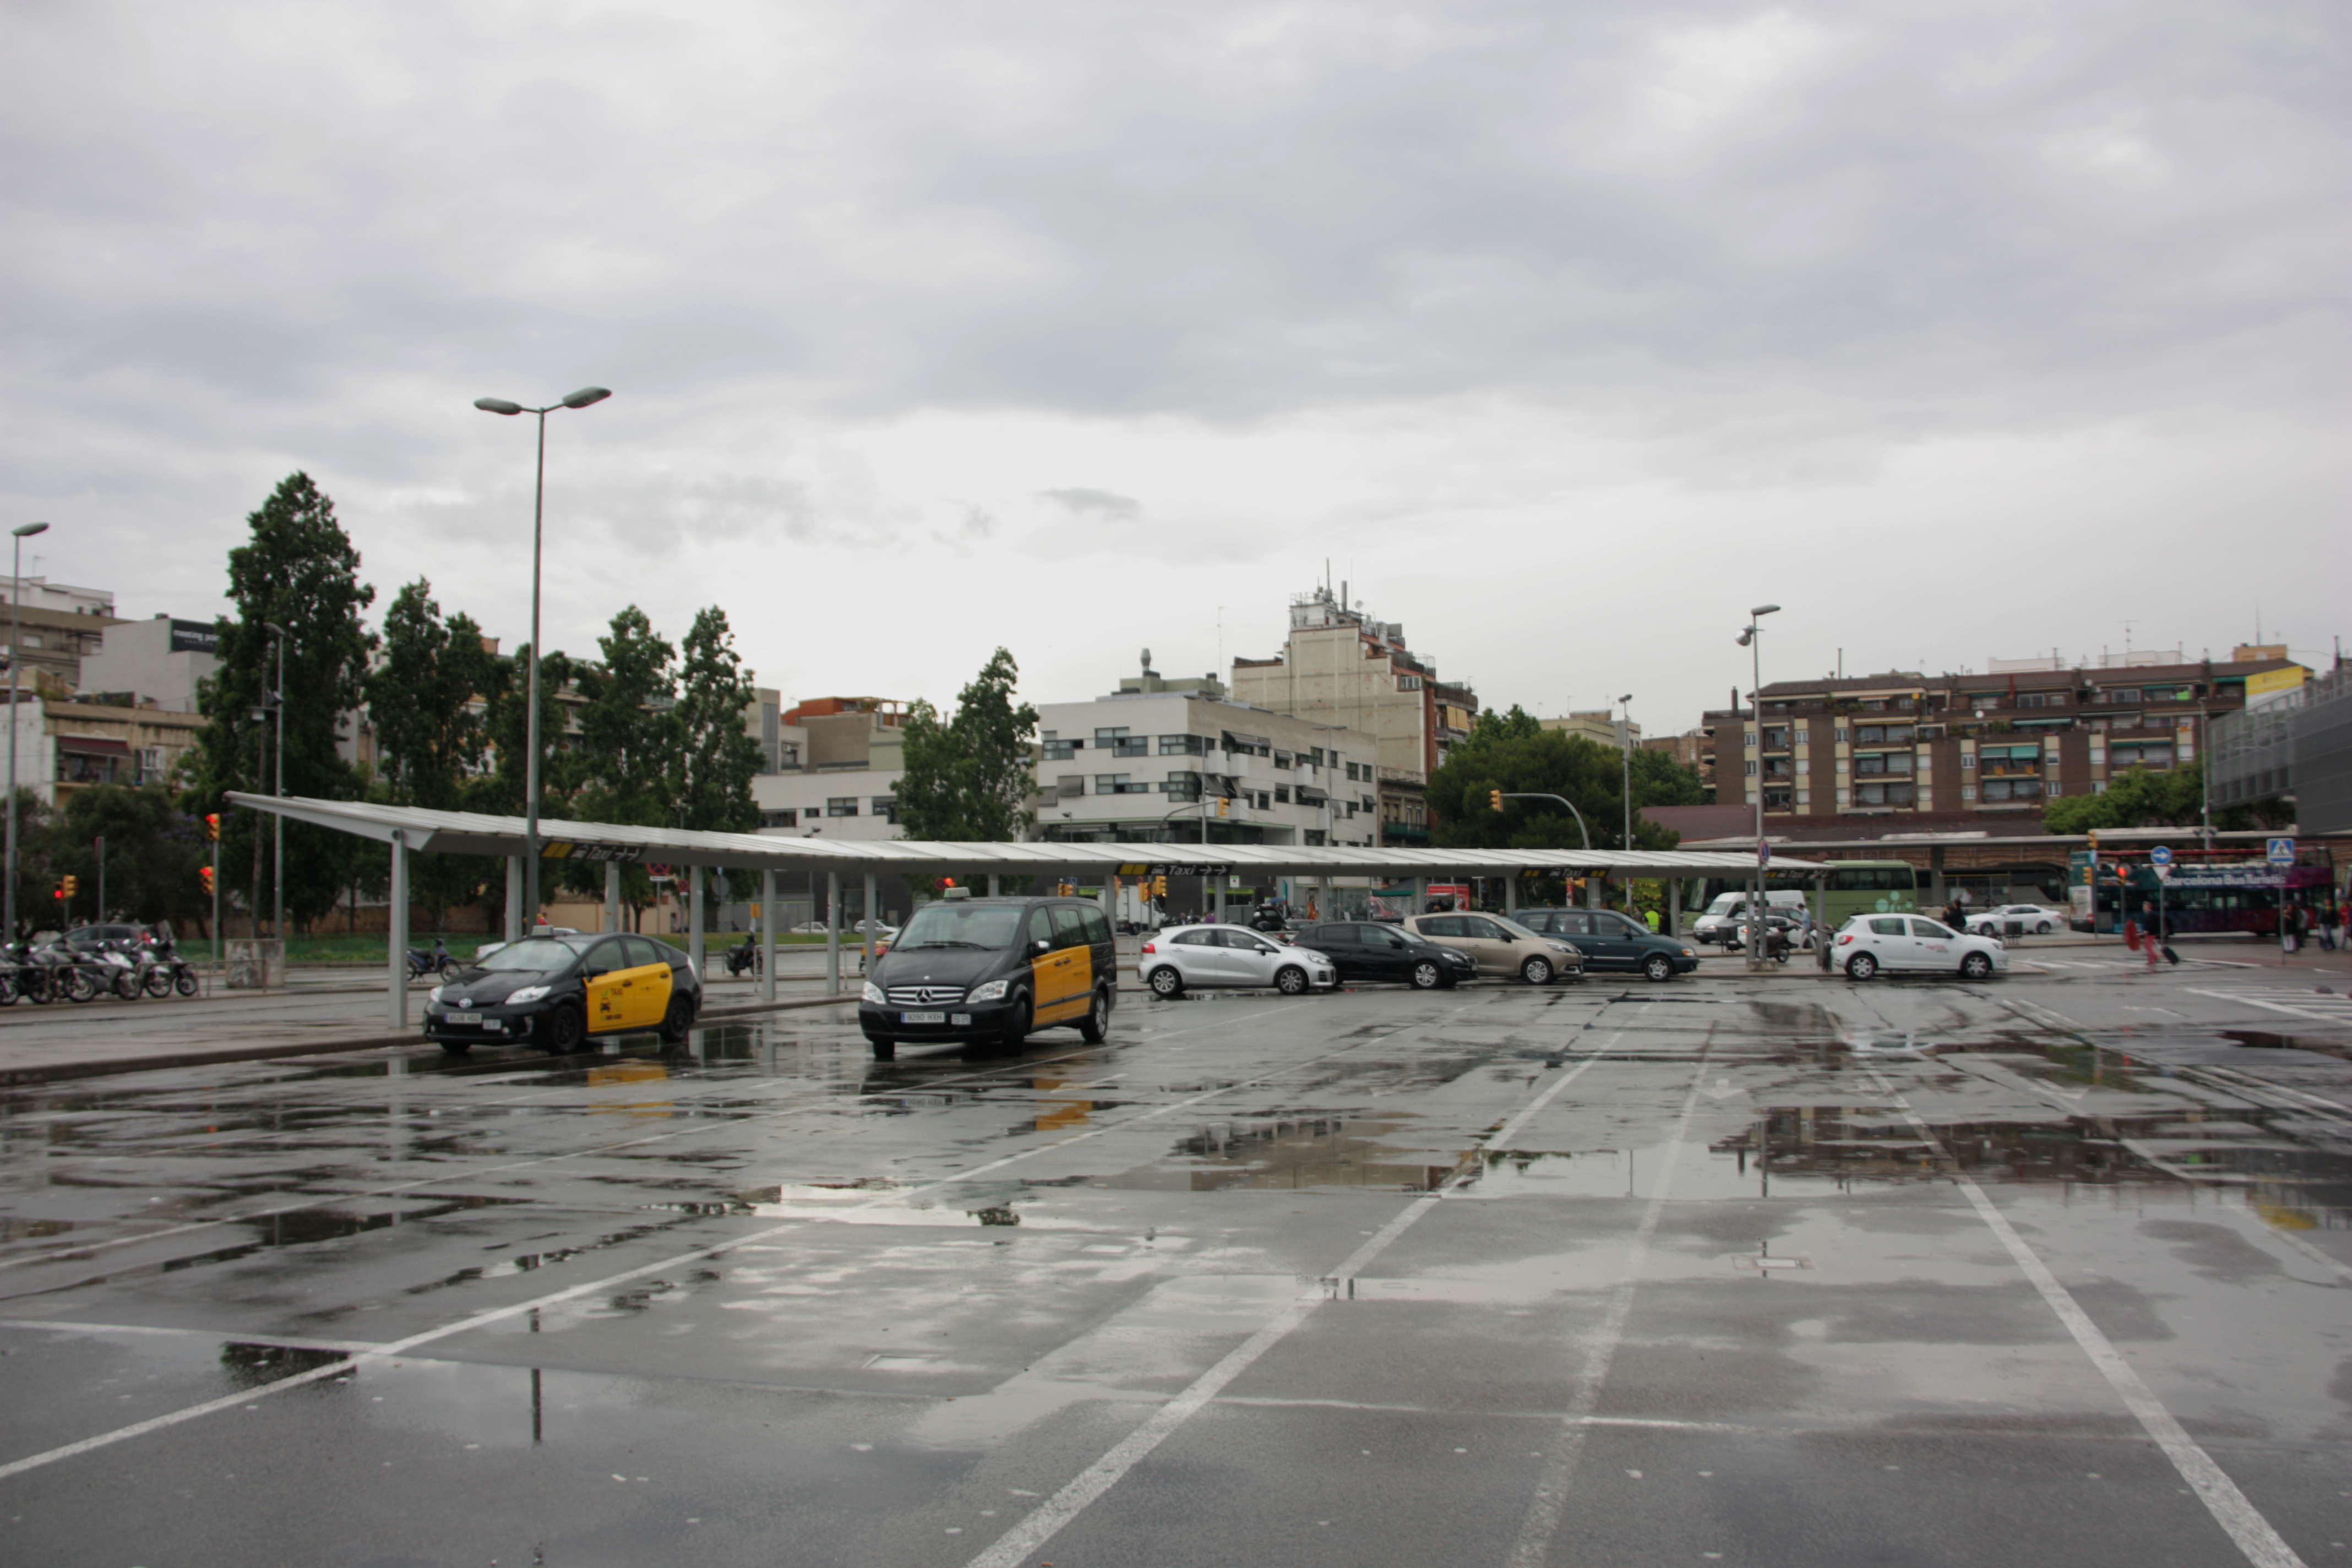 The taxi stand in Sants was almost empty due to the strike (by ACN)